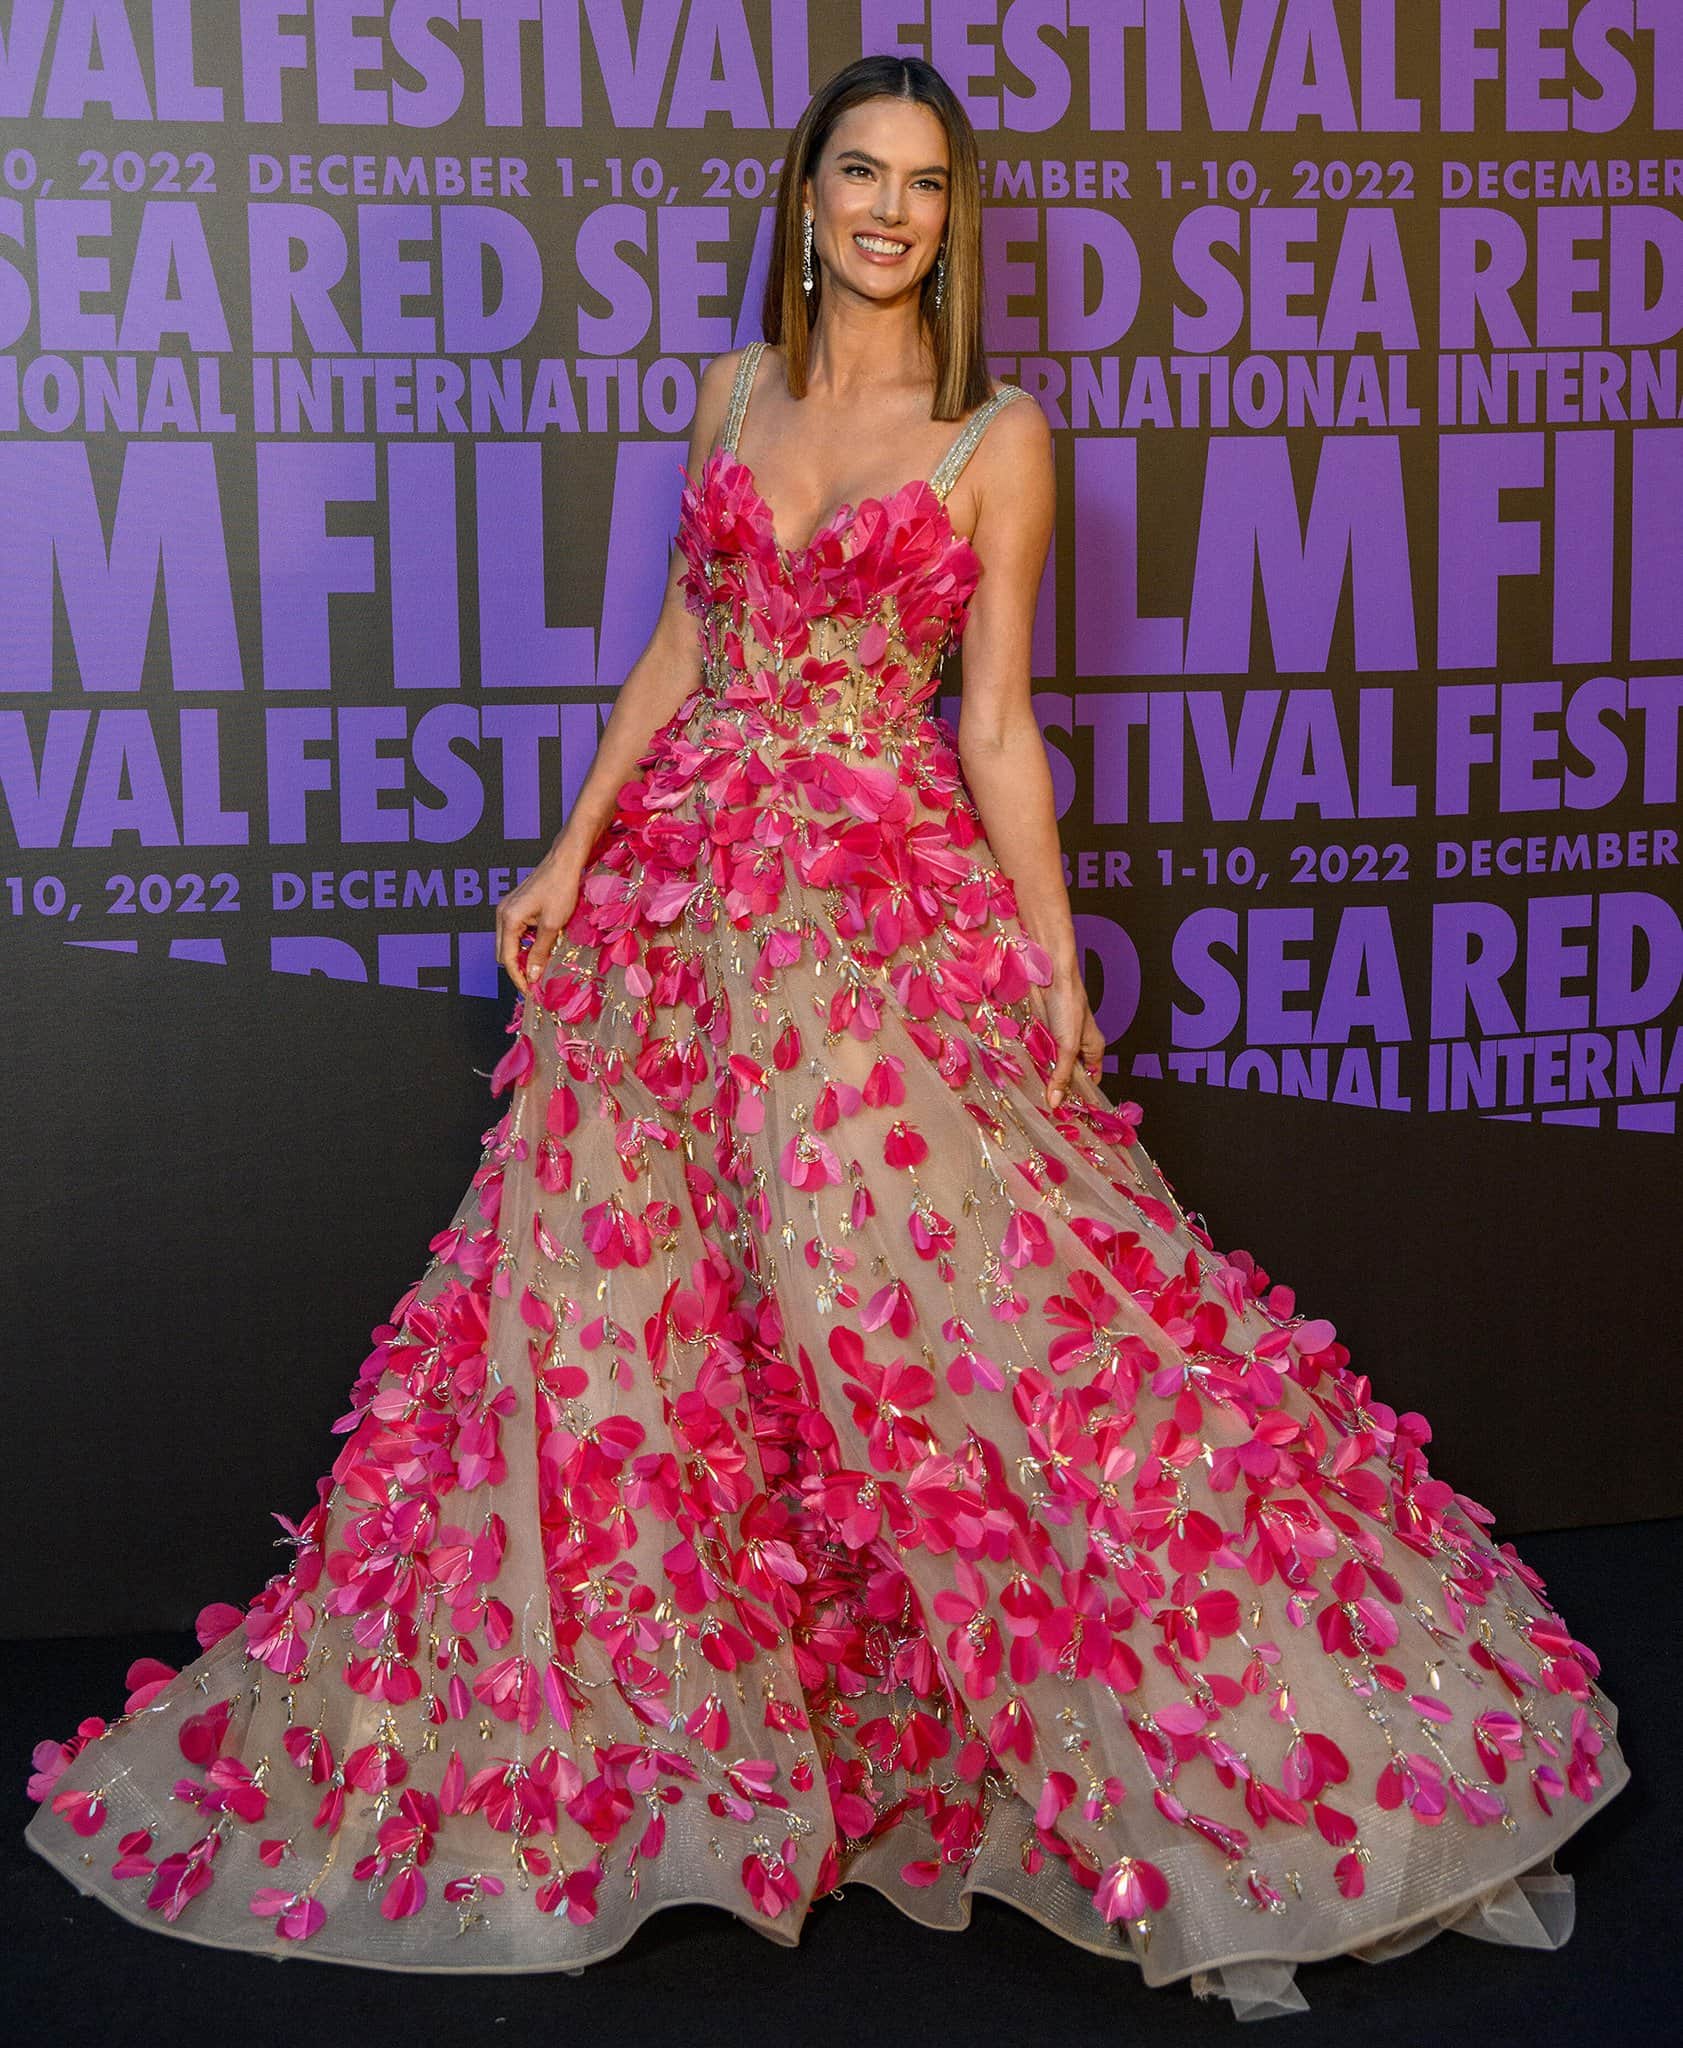 Alessandra Ambrosio donned an exquisite ensemble from the Elie Saab Spring-Summer 2022 Couture collection at the Celebration of Women in Cinema Gala